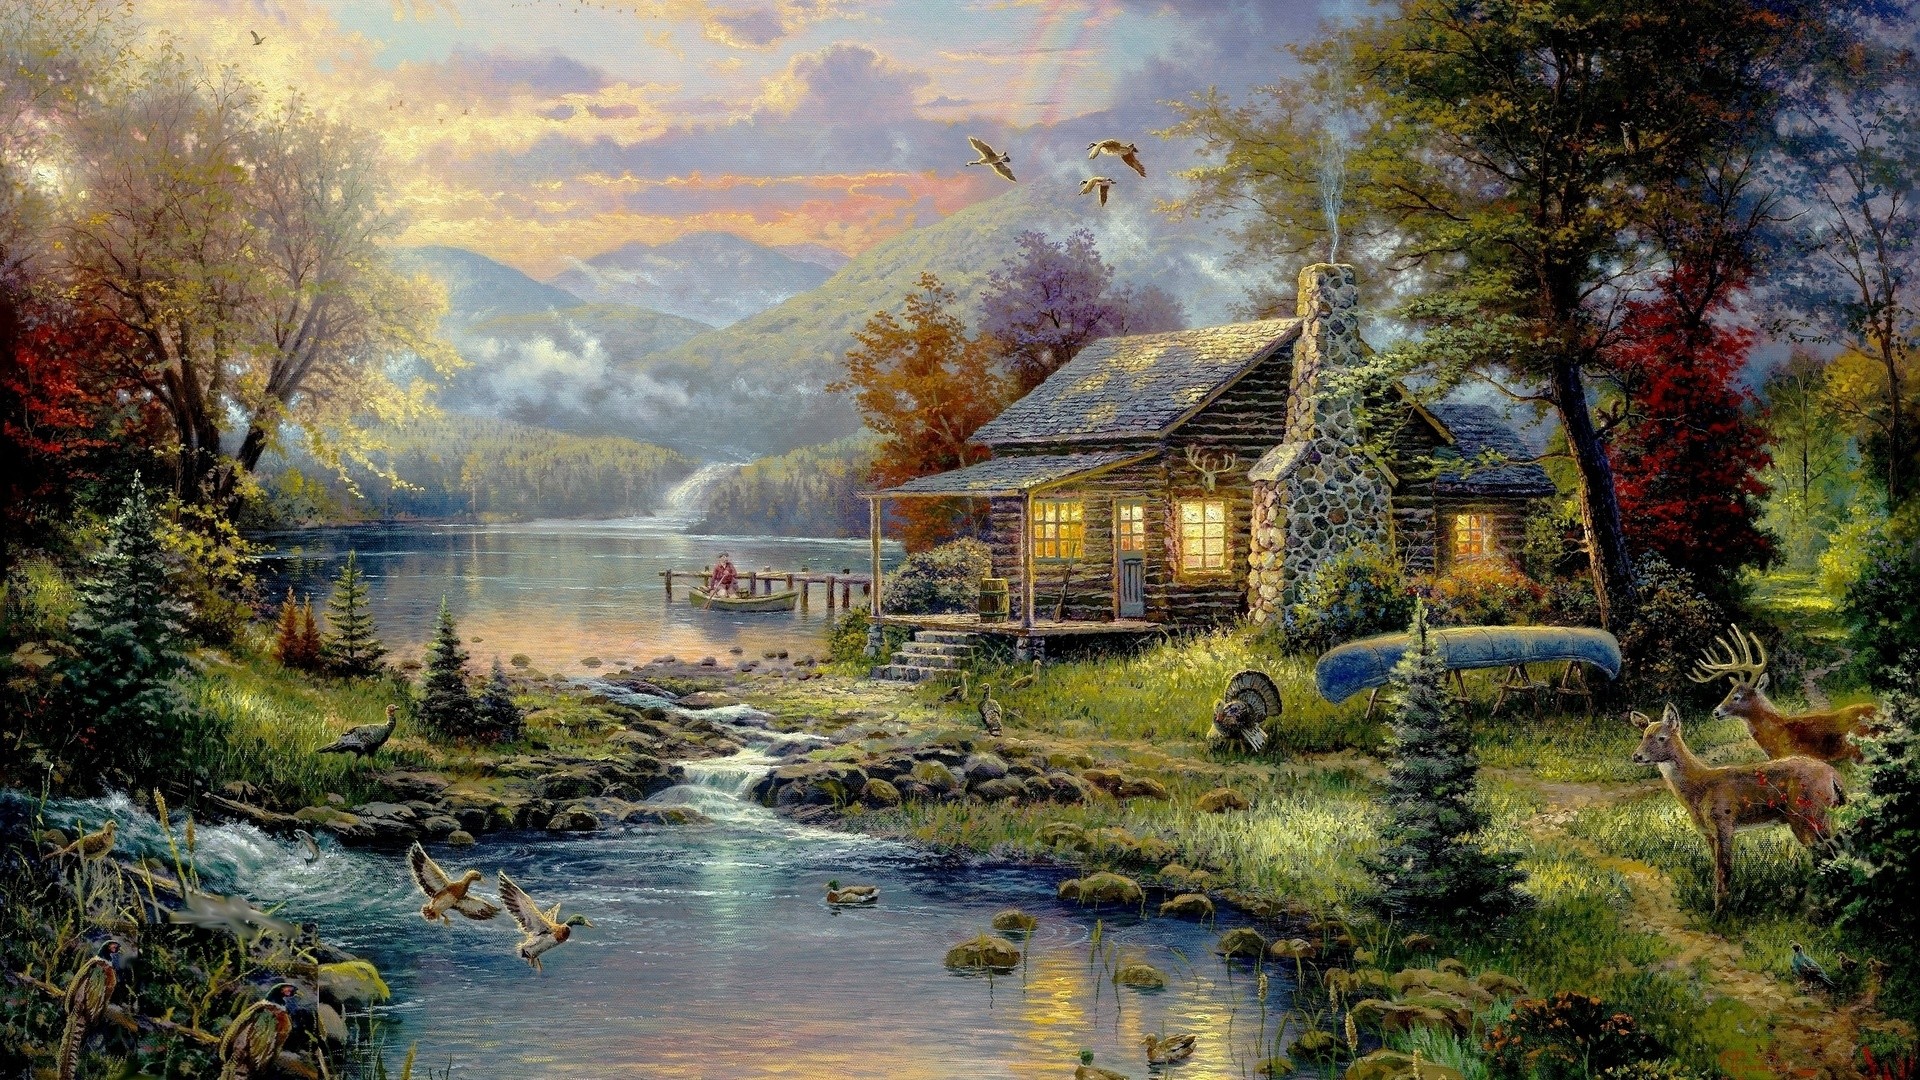 House By The River Art wallpaper